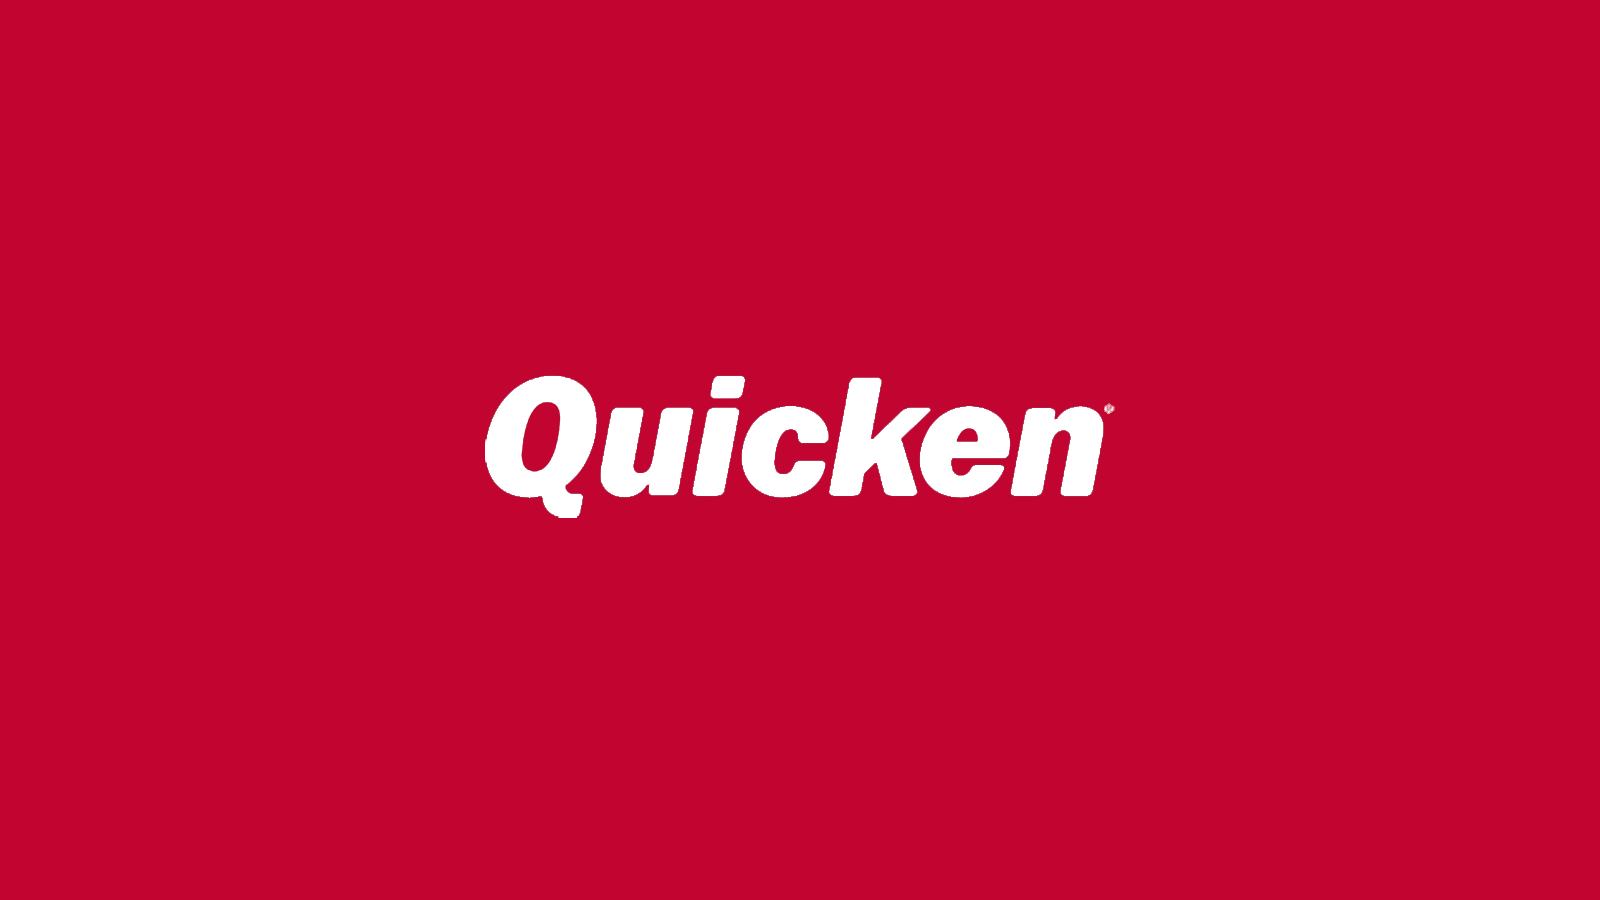 quicken home and business 2017 review